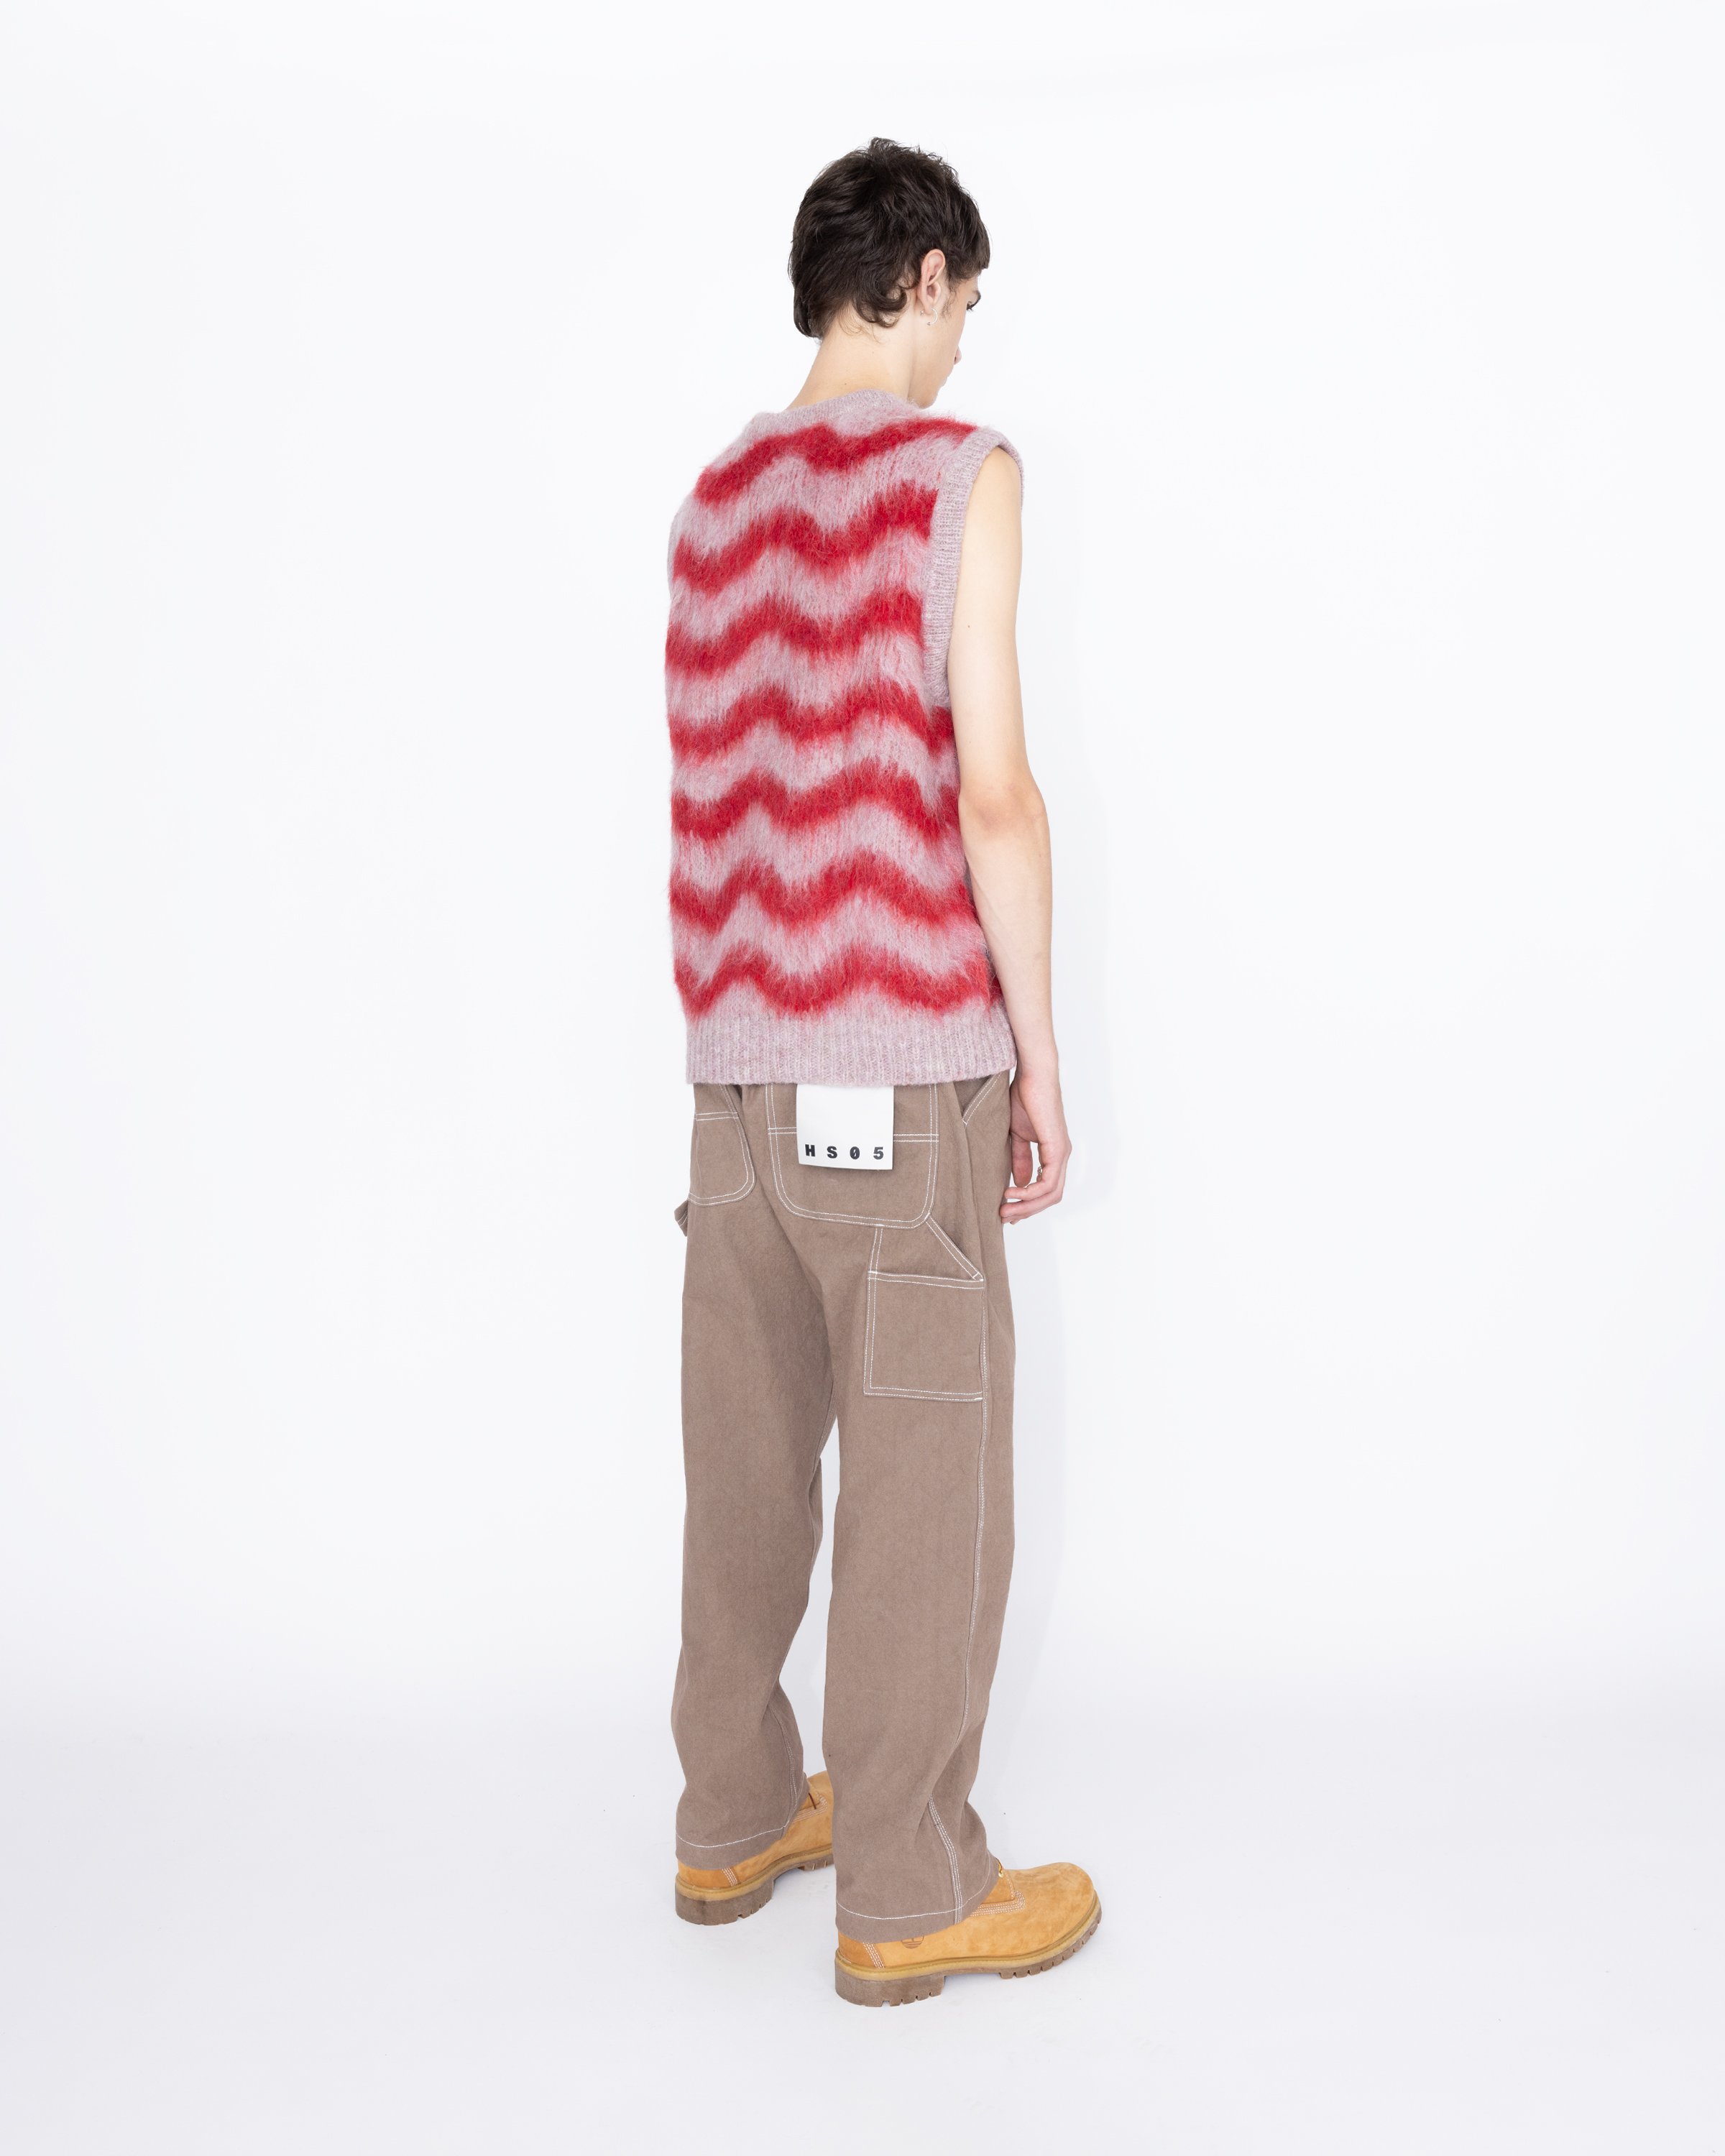 Highsnobiety HS05 - Alpaca Fuzzy Wave Sweater Vest Pale Rose/Red - Clothing - Multi - Image 5